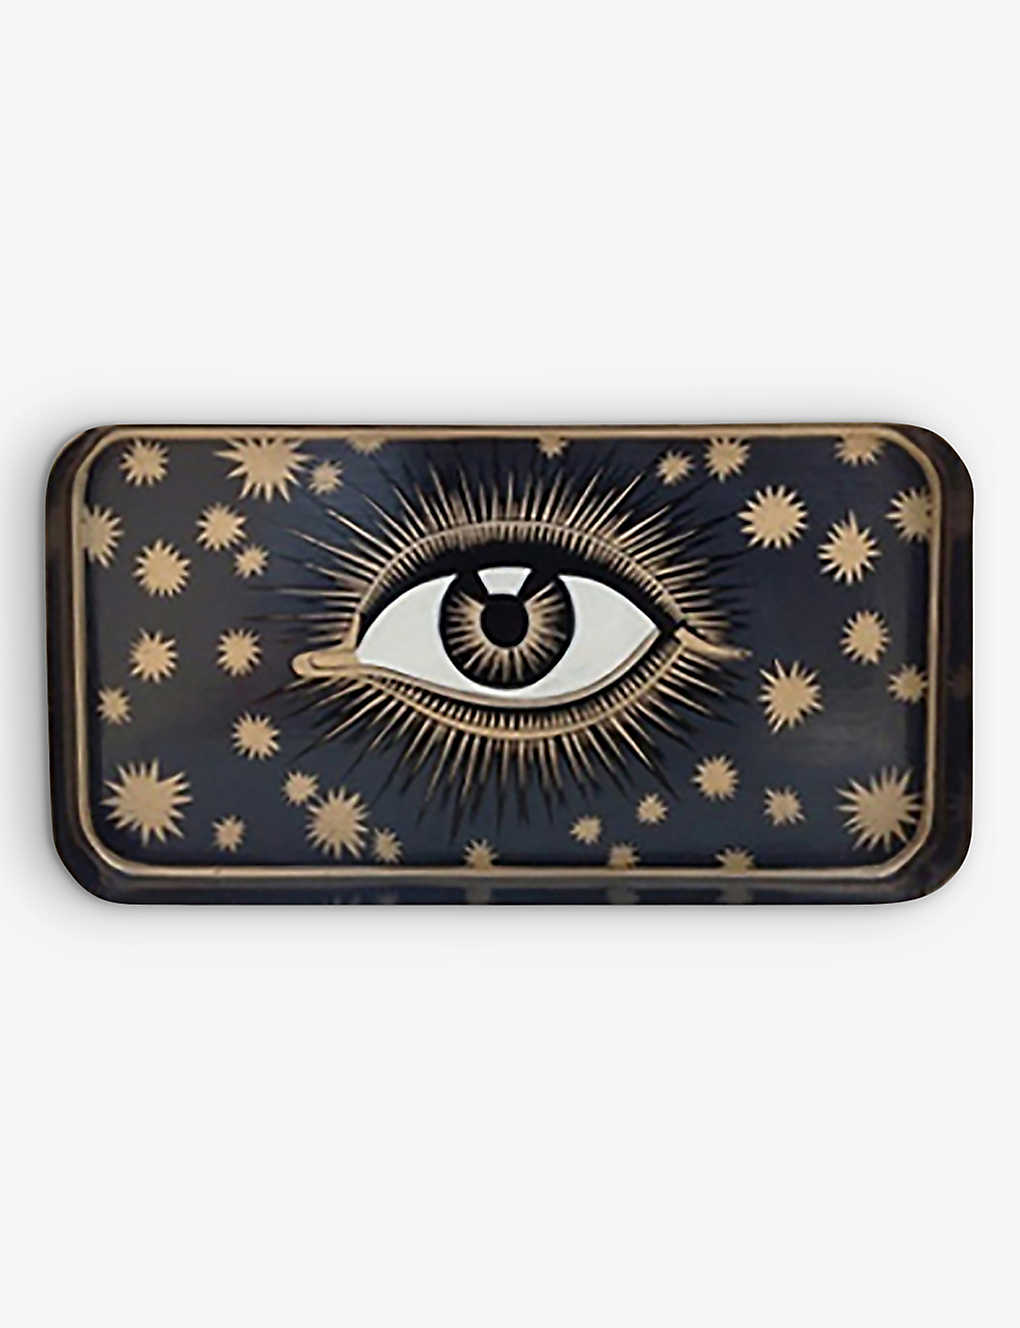 Les Ottomans Eye Hand-painted Iron Tray 17x32cm In Black